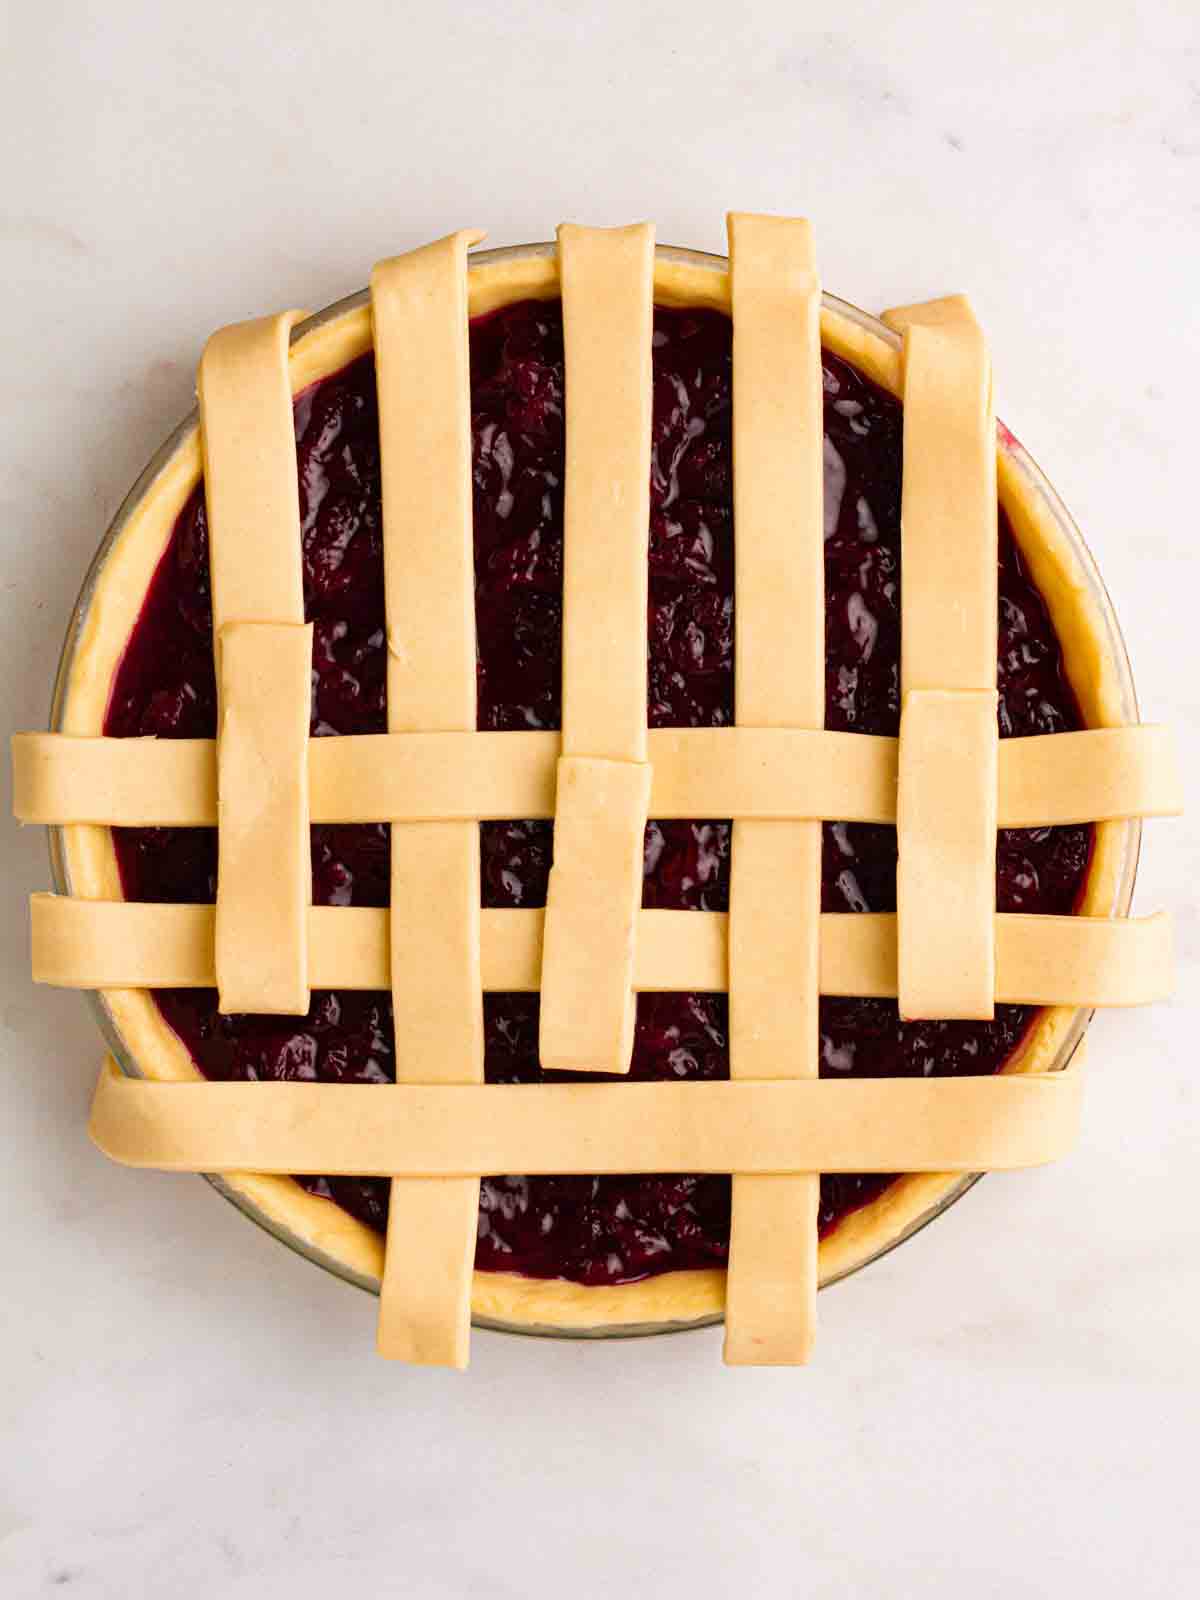 Looking down on an unbaked cherry pie, with a partially constructed lattice topping for step 7 in the recipe.